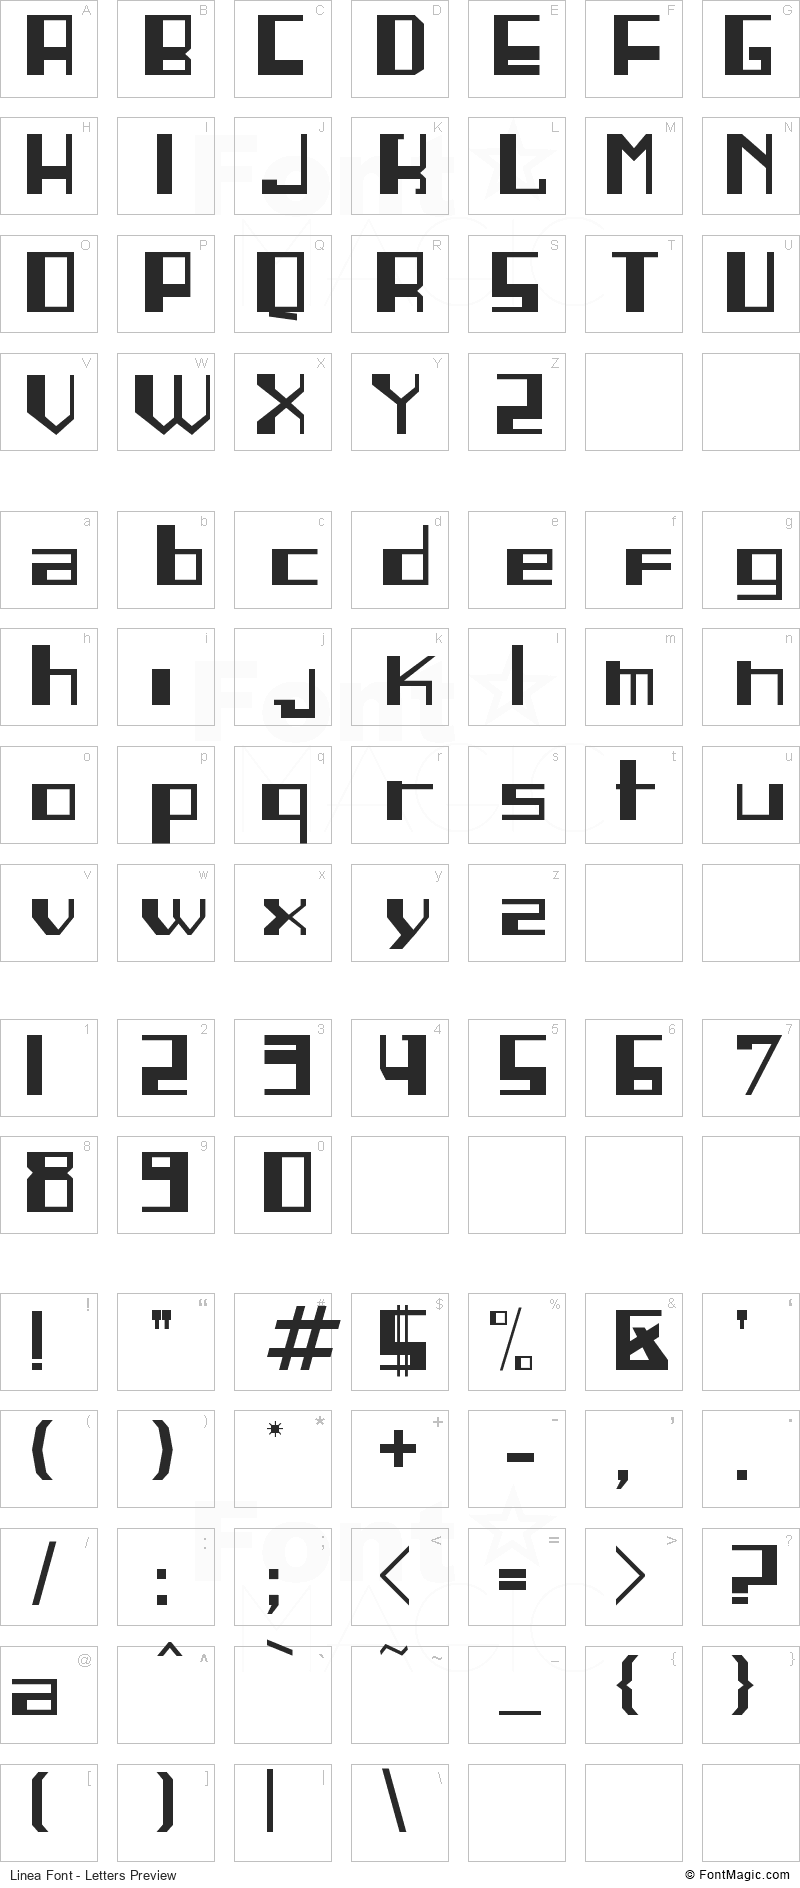 Linea Font - All Latters Preview Chart